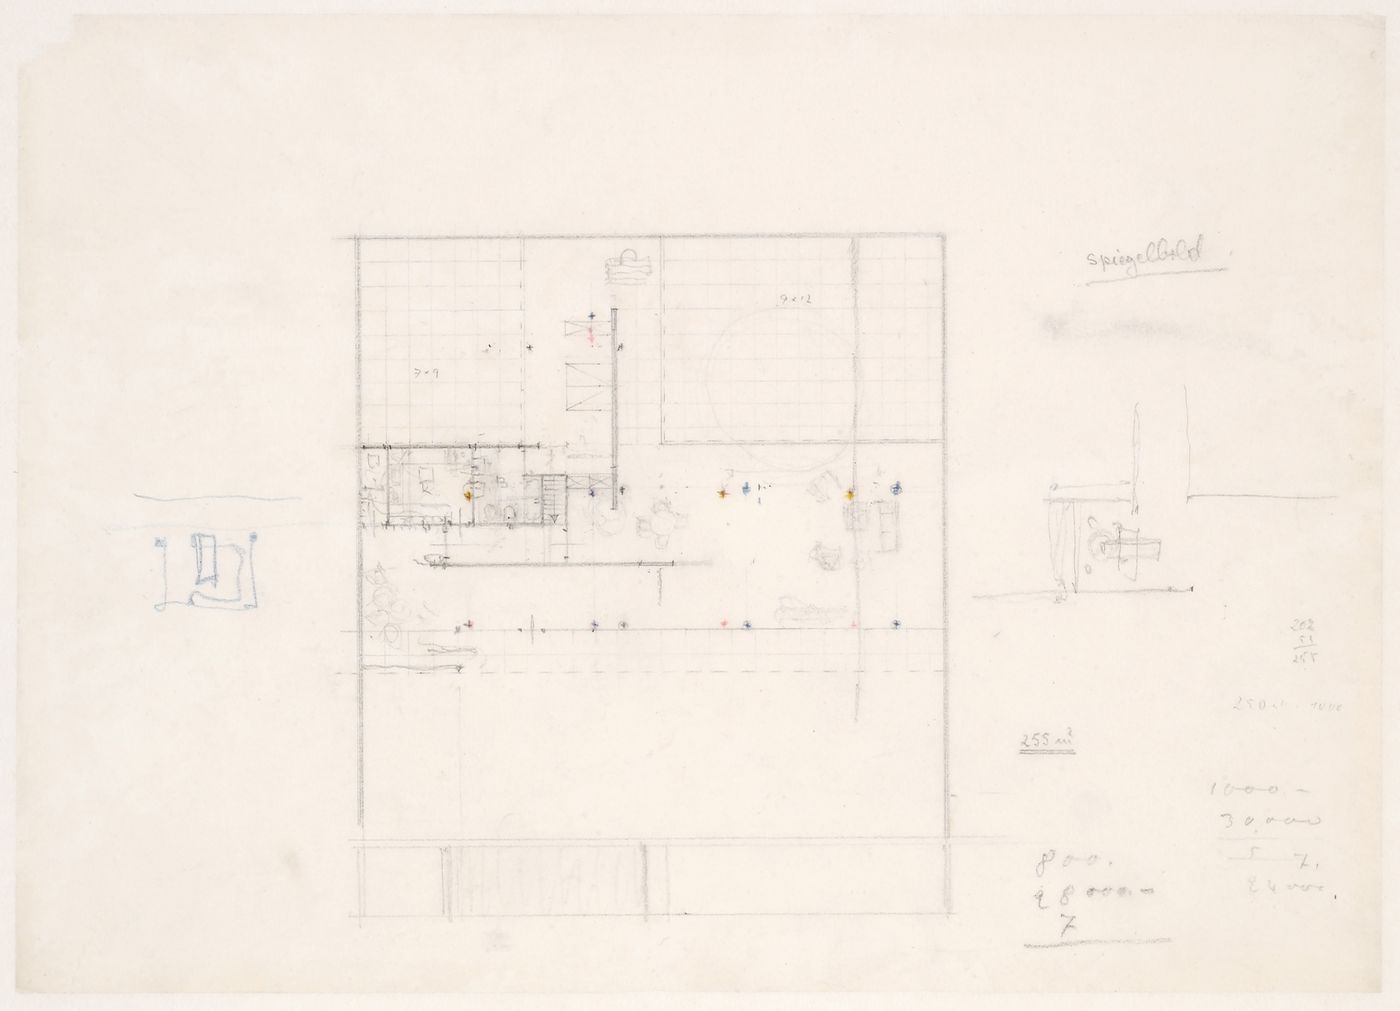 Plan and partial sketch plans for a Court House